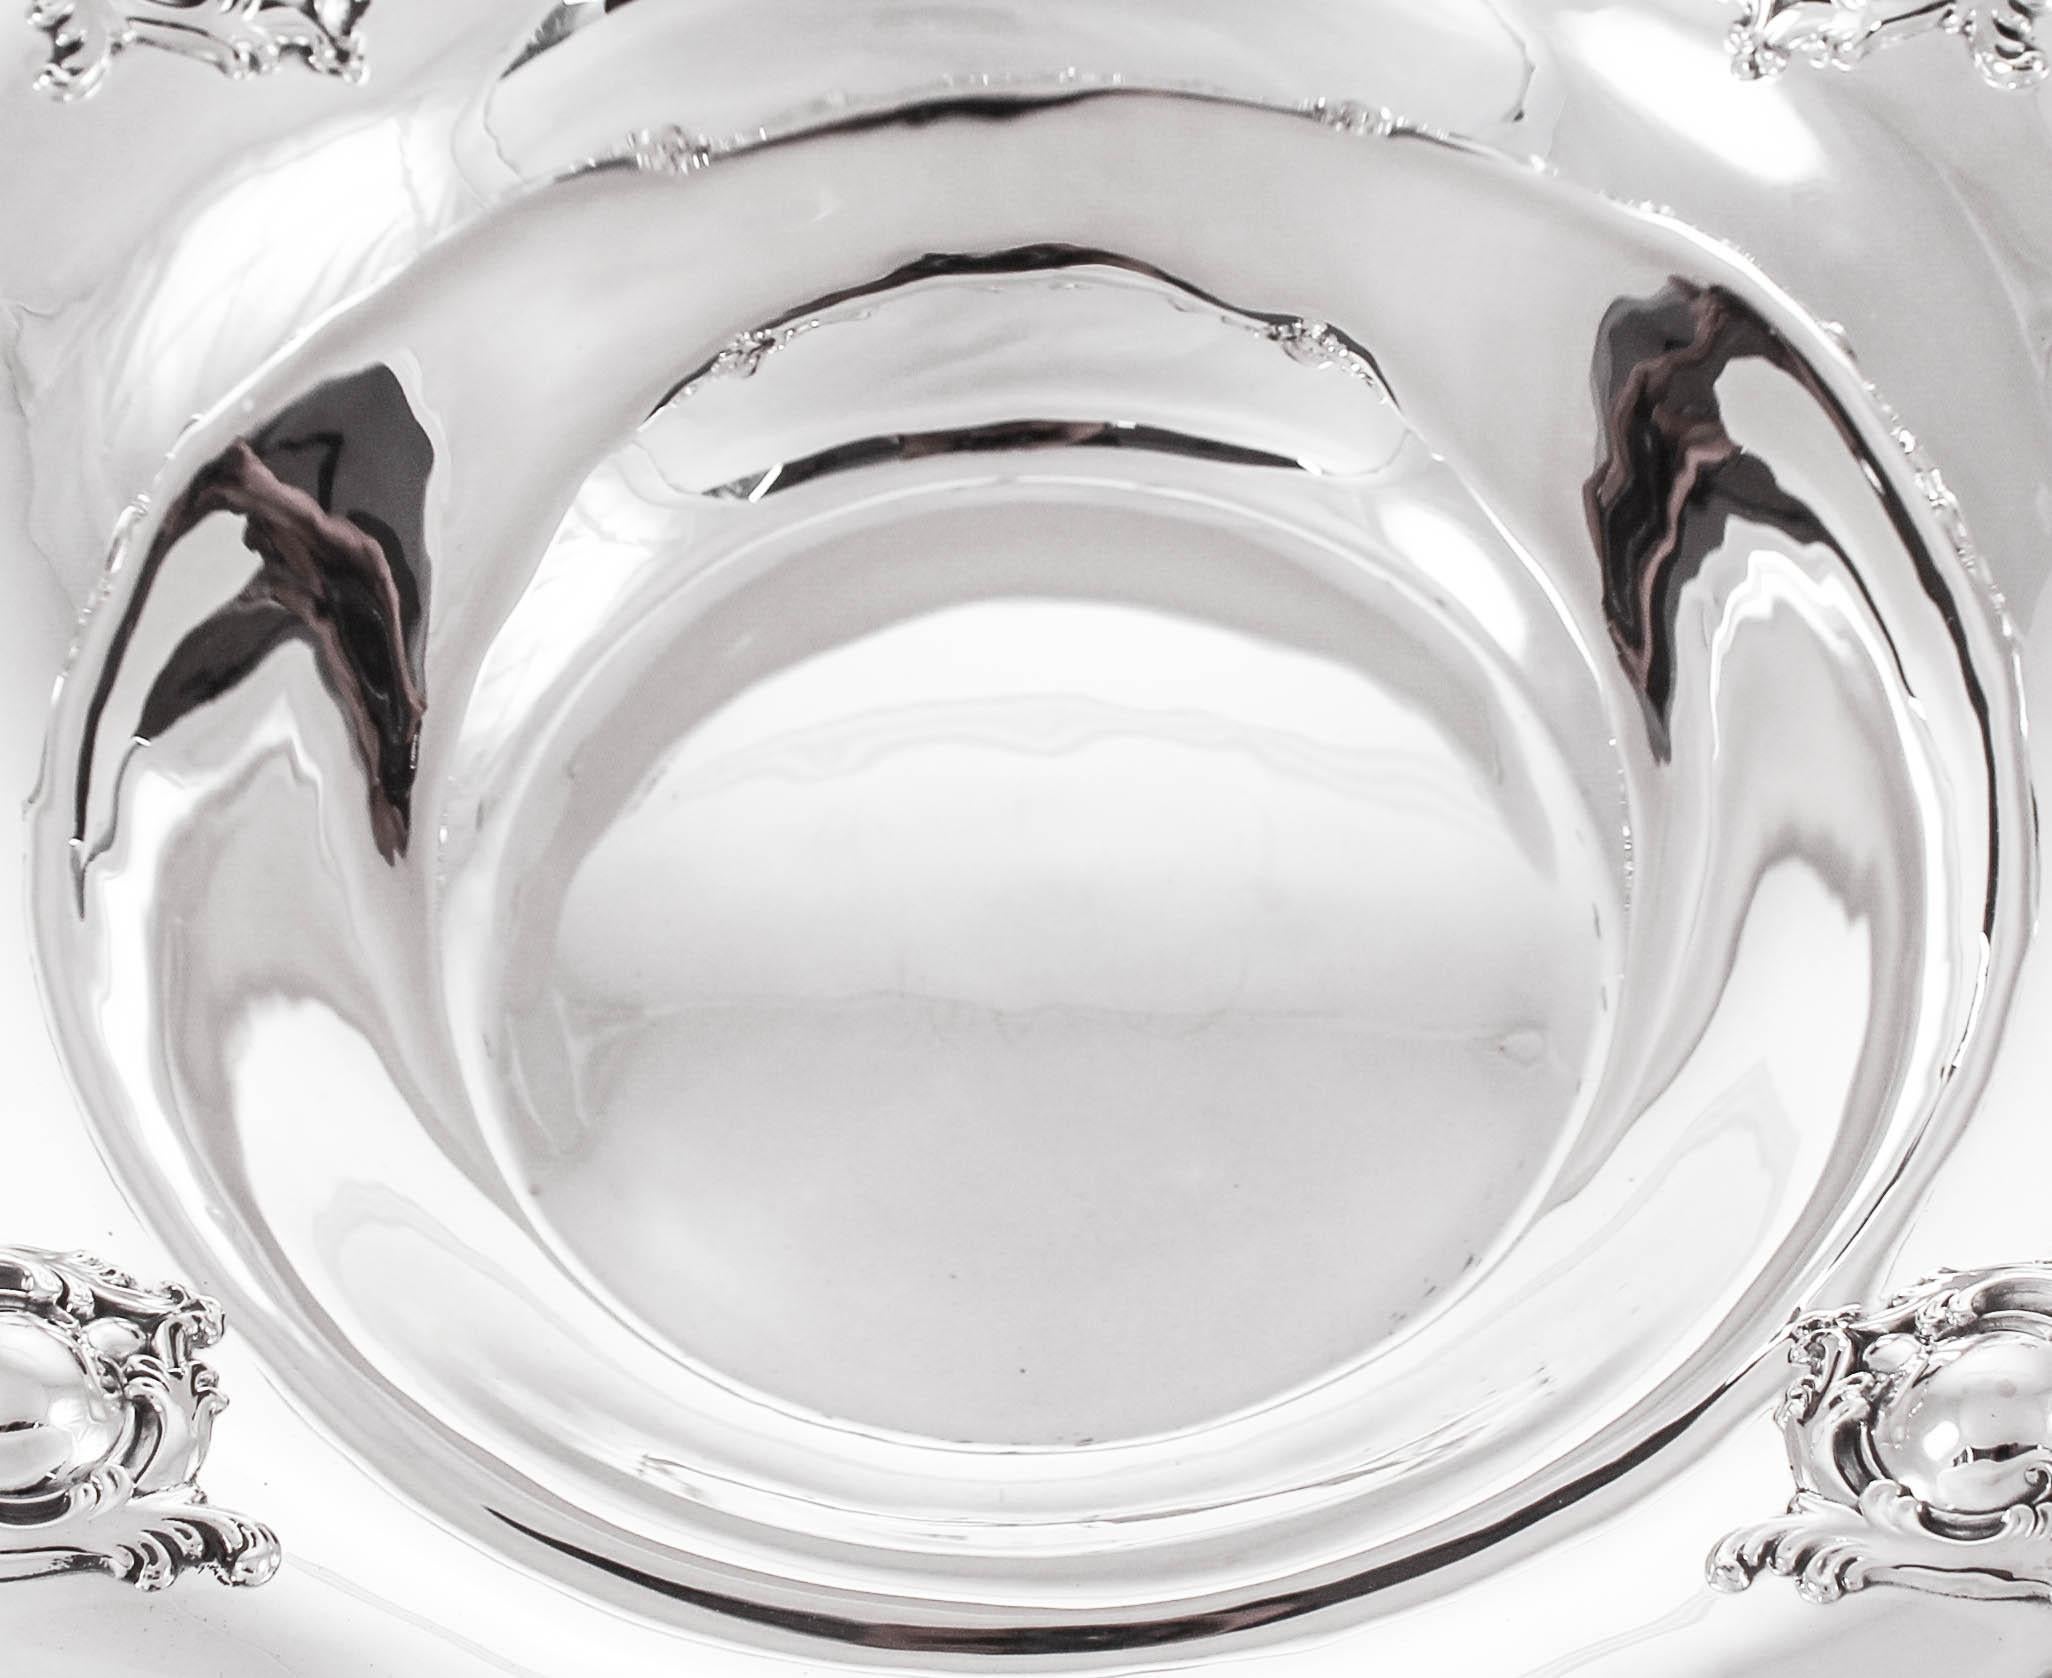 This sterling silver bowl has a scalloped edge with raised-work along the rim. Four medallion-like designs surrounded by the same type of raised-work. It’s an impressive looking piece and very functional.